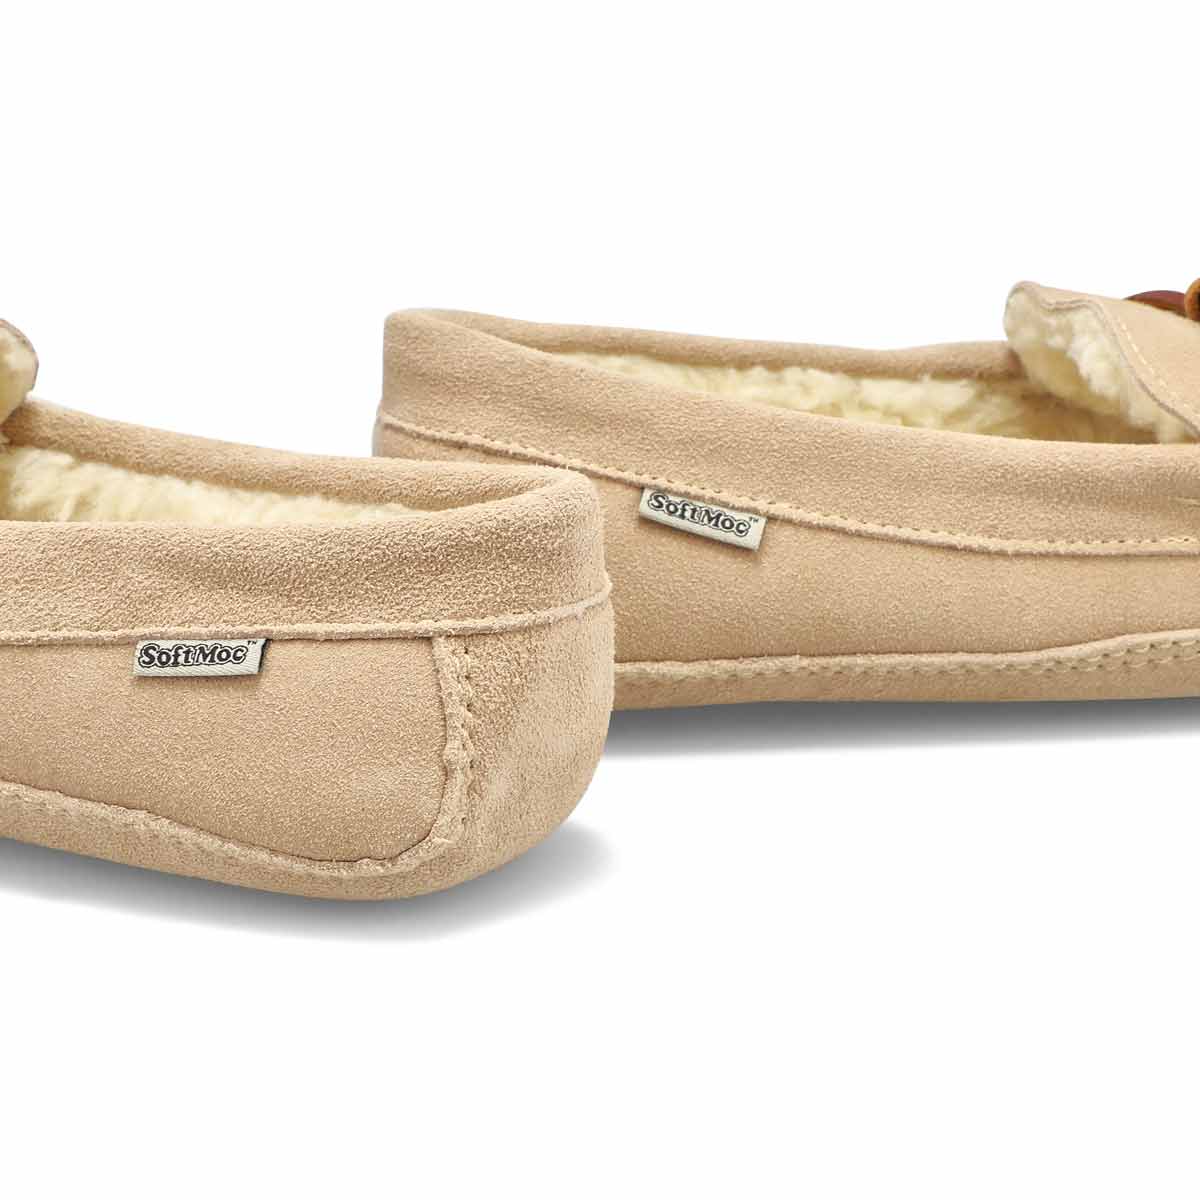 Wells Womens JL9985 Faux Suede Fur Lined Slip On Flat Moccasins